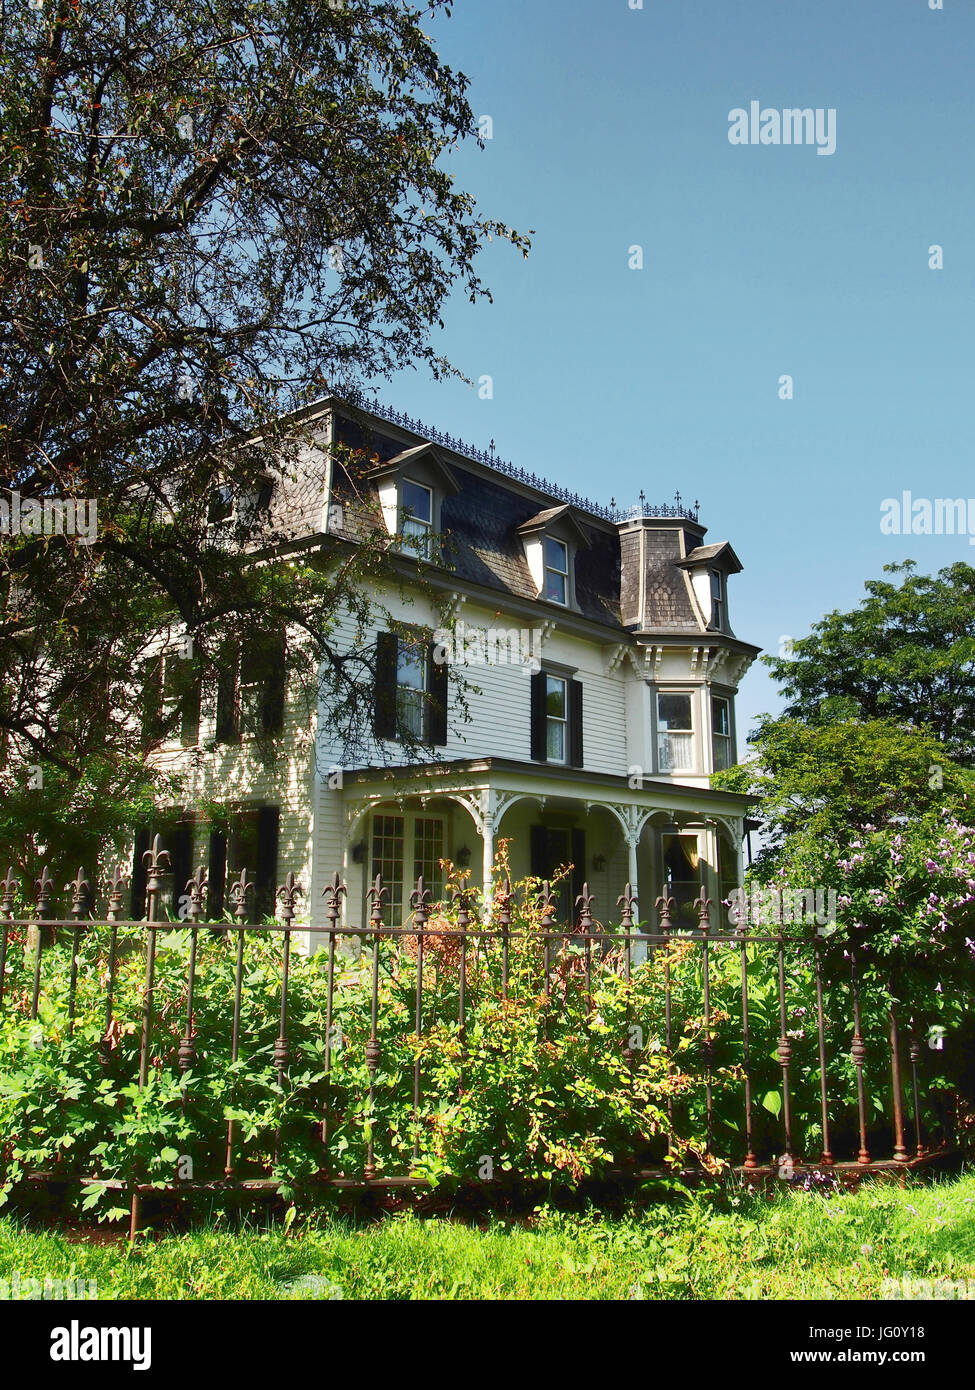 Gated old Victorian manor home Stock Photo